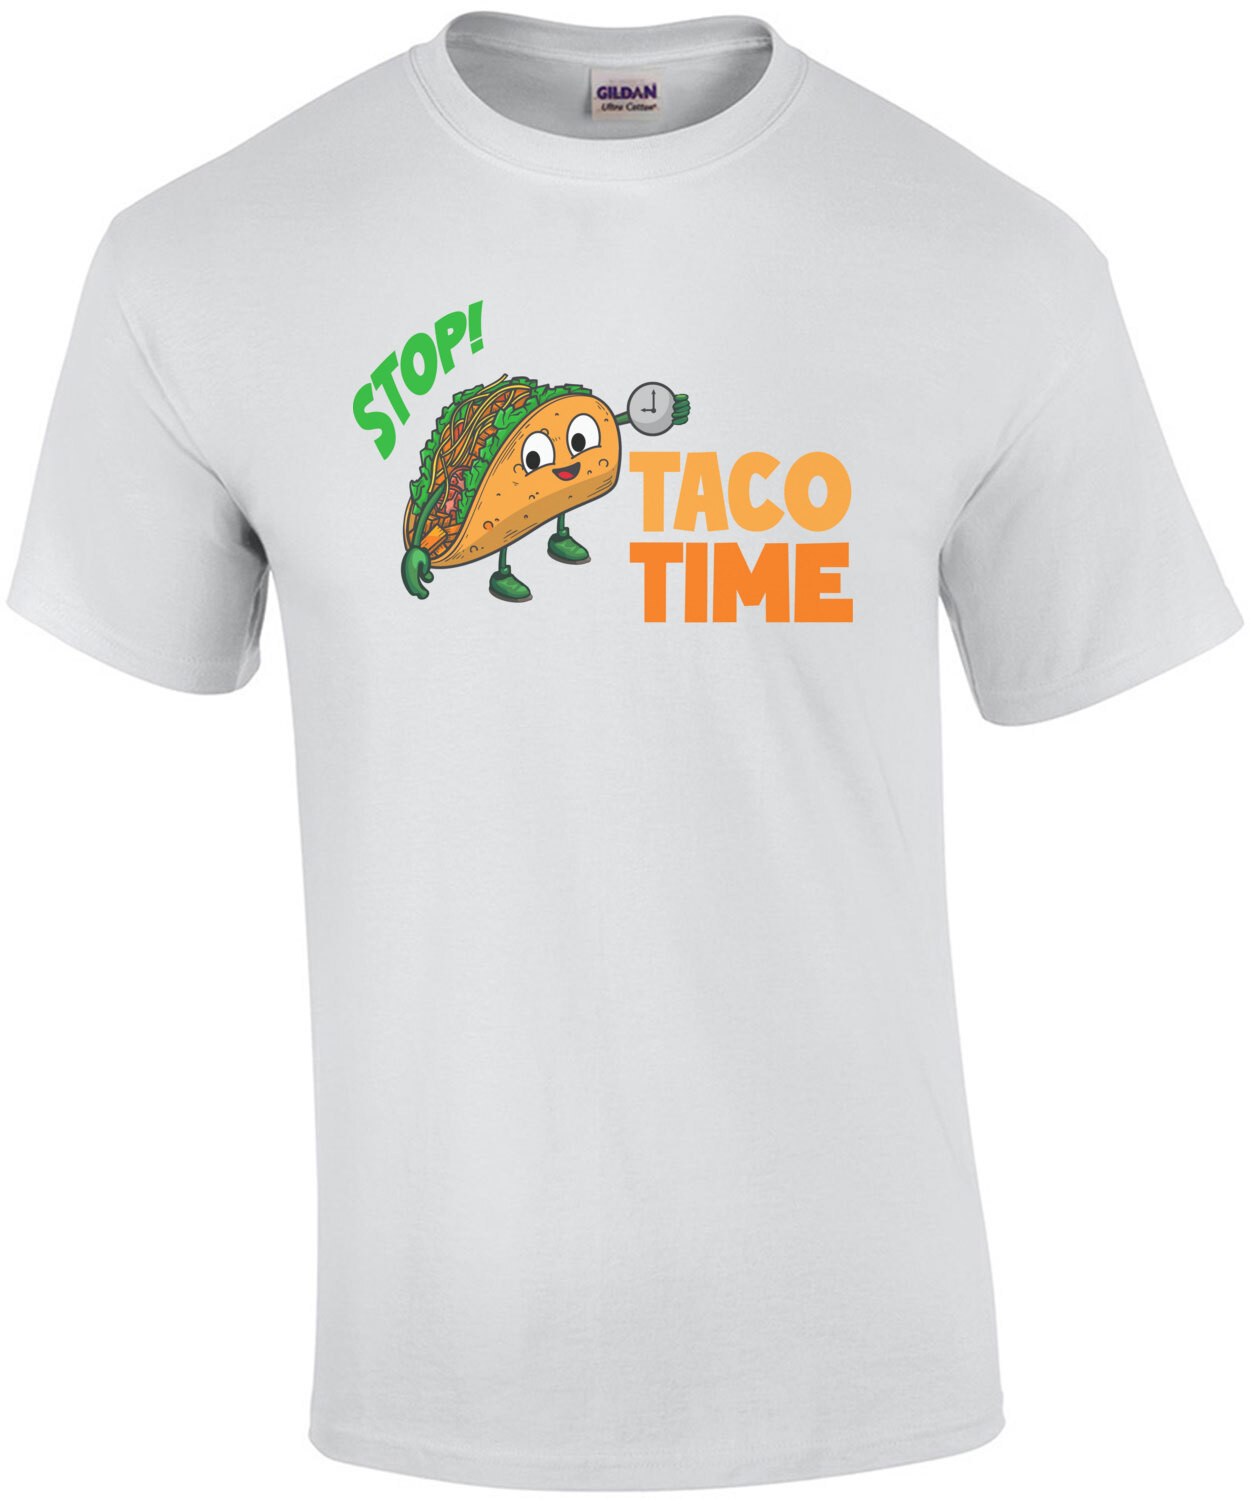 Stop Taco Time - Funny Taco Tuesday T-Shirt